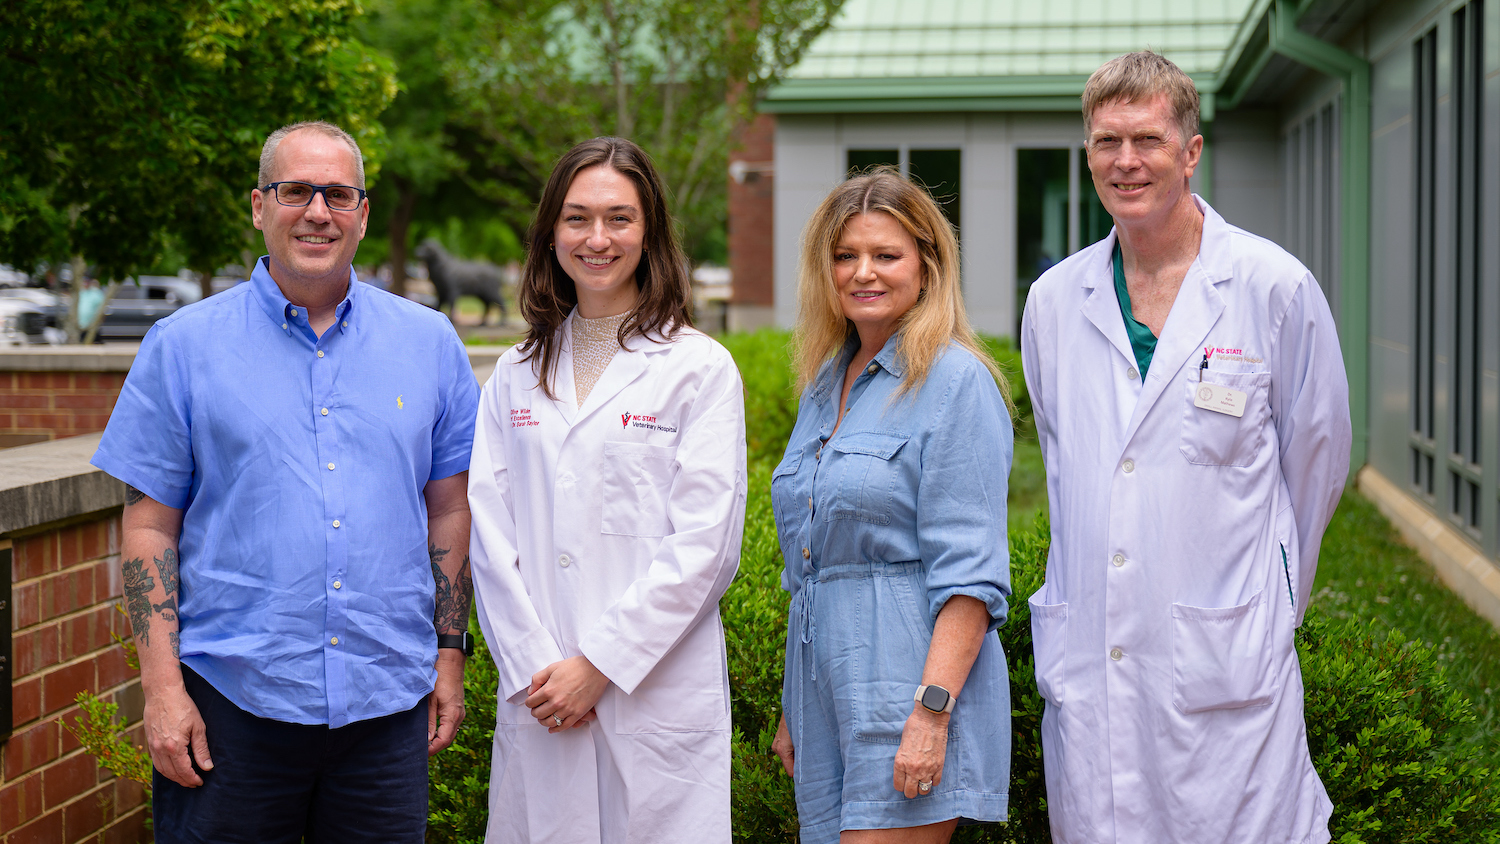 Proudly wearing her Olive Wilder Coat of Excellence, small animal surgery resident Dr. Sarah Saylor stands between Tom and Tonya Wilder and alongside Dr. Kyle Mathews, a professor of soft tissue and oncologic surgery. (John Joyner/NC State College of Veterinary Medicine)